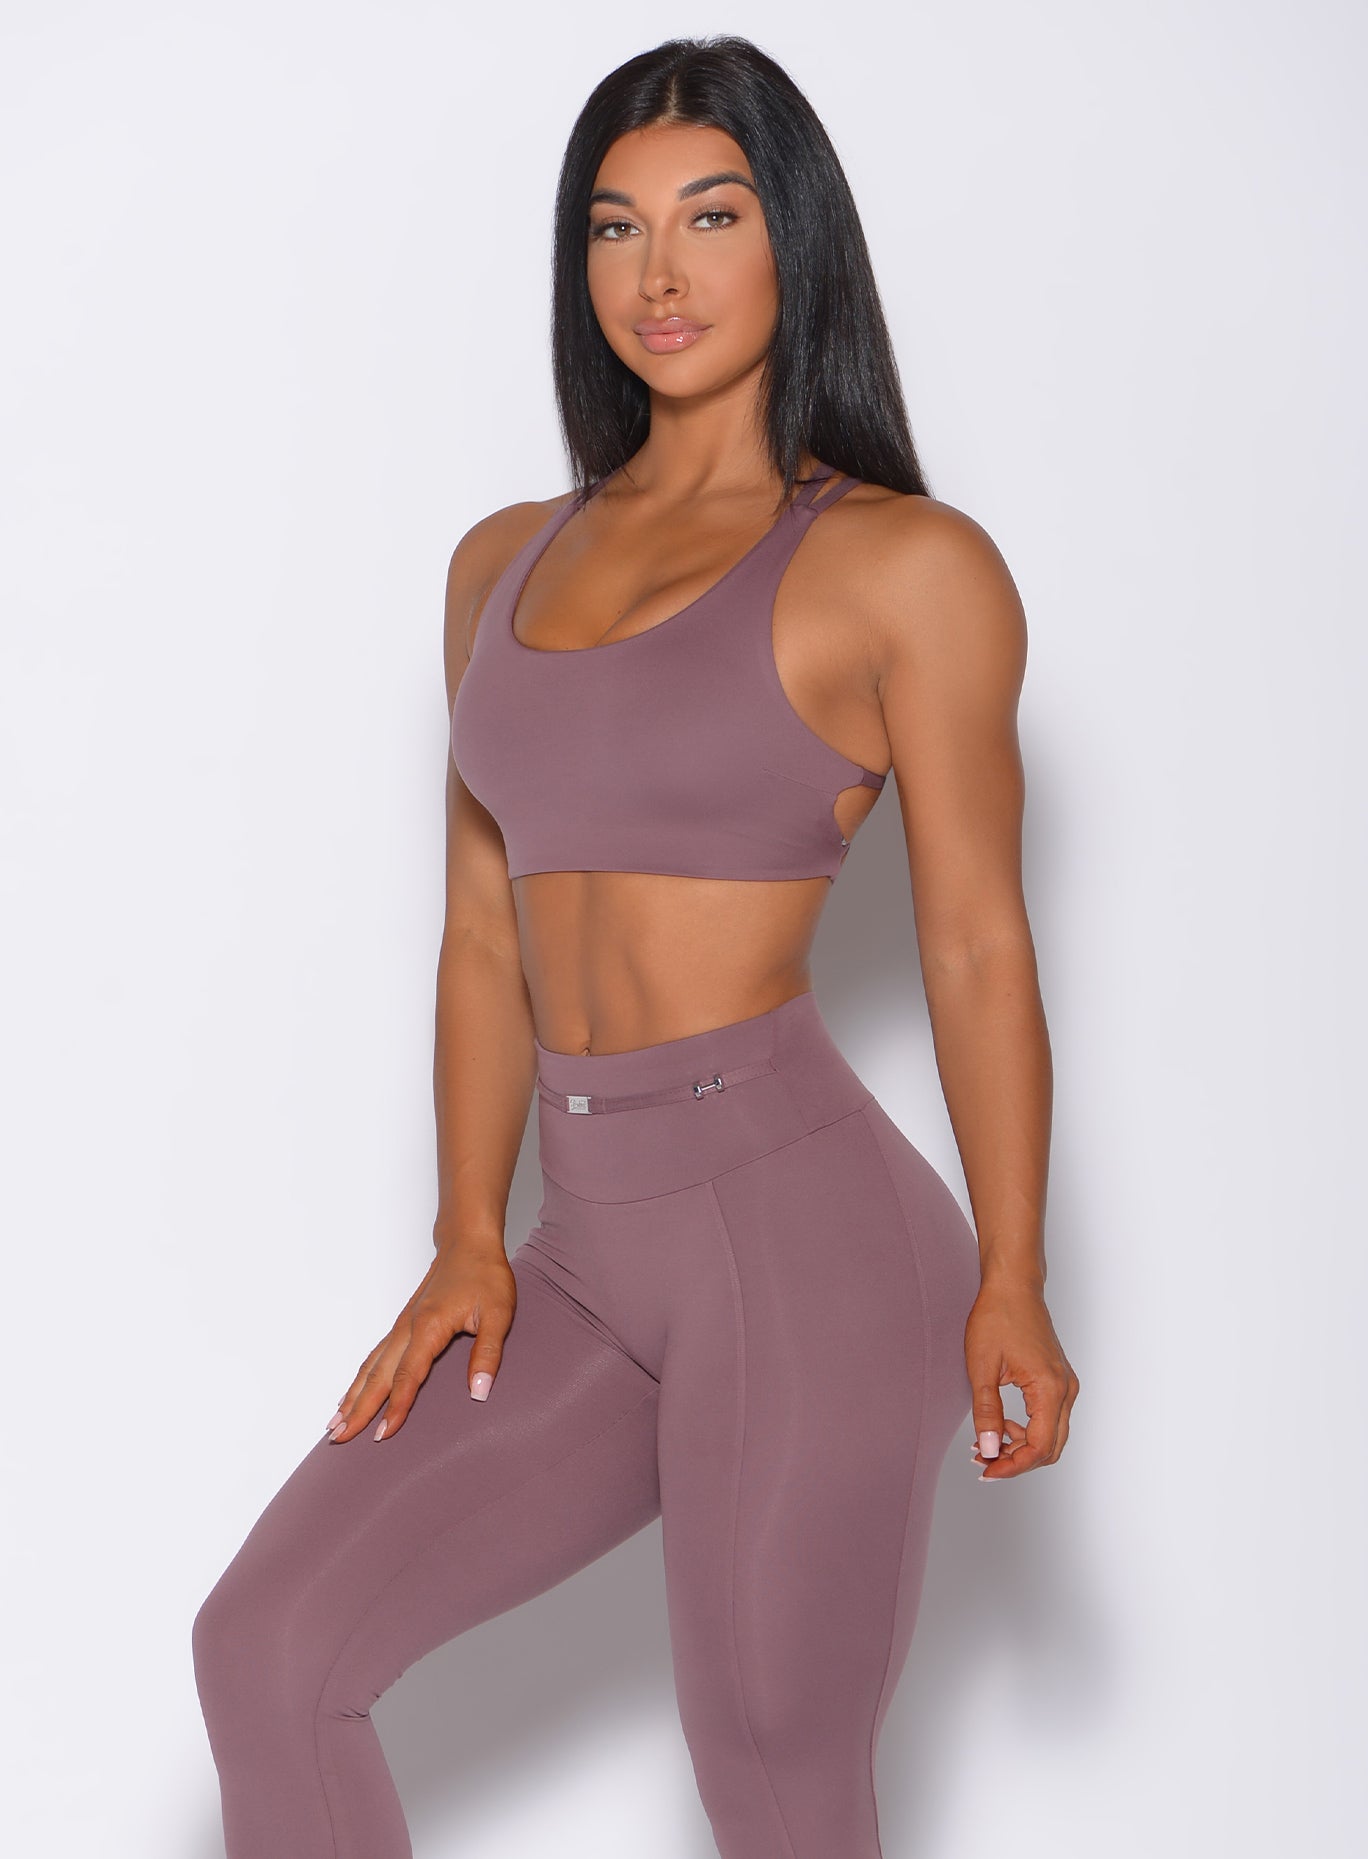 Left side profile view of a model angled left wearing our mauve barbell sports bra and a matching leggings